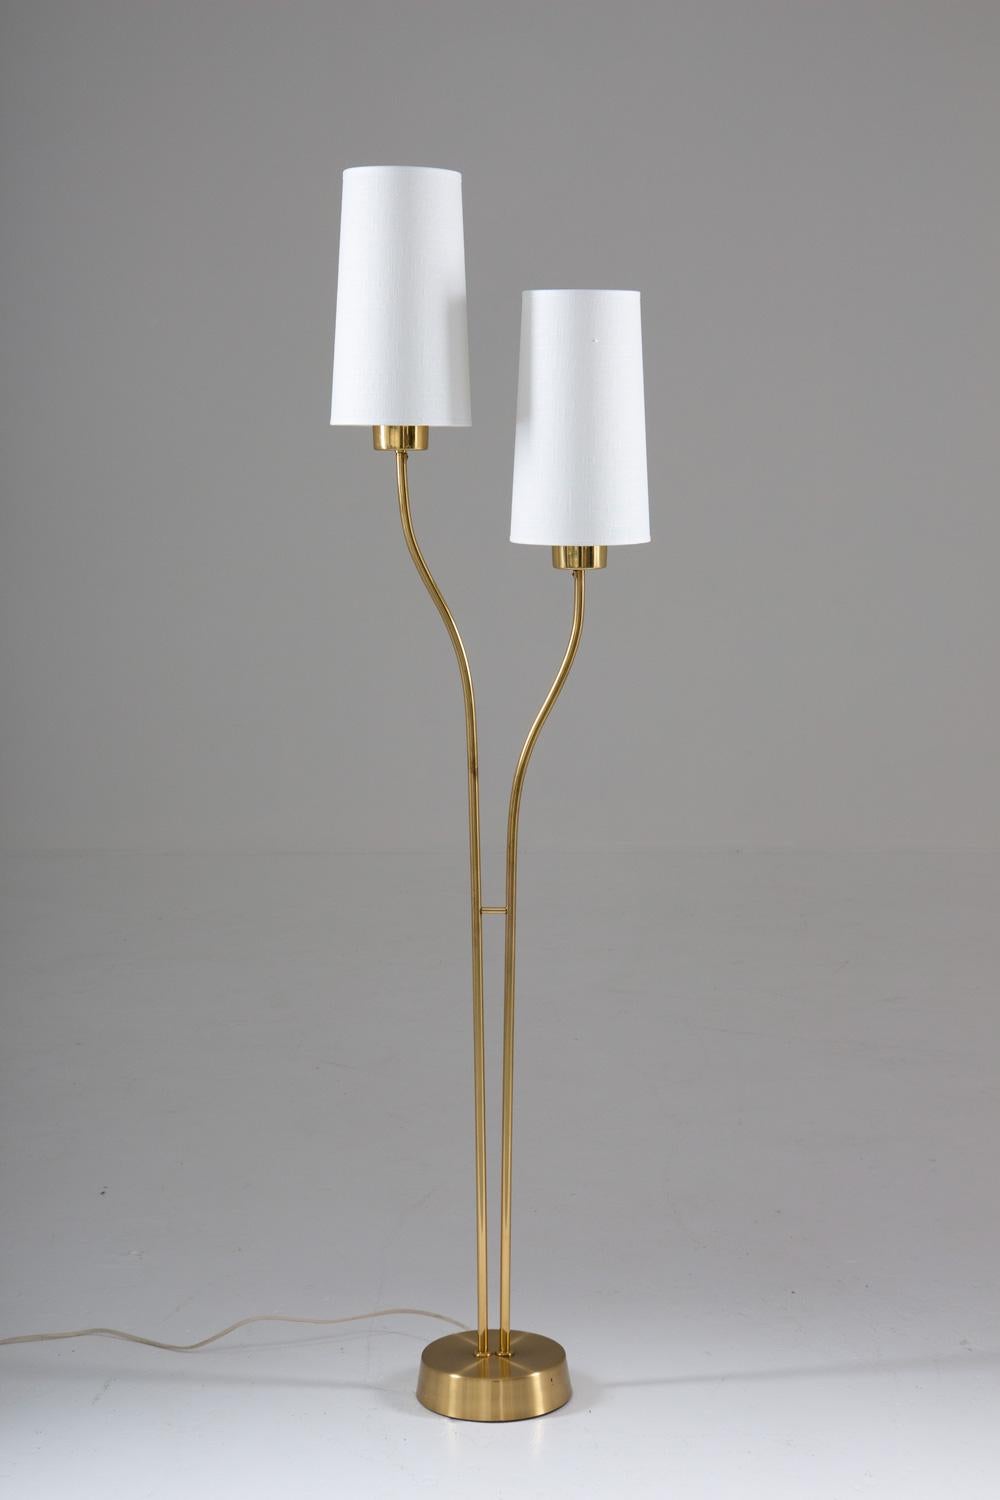 Floor lamp model 5738 EOS, Sweden 1950s.
Beautiful floor lamp, consisting of two organically-shaped brass rods, each holding a cone-shaped fabric shade. The rods are resting on a heavy brass-covered foot. 

Condition: Very good original